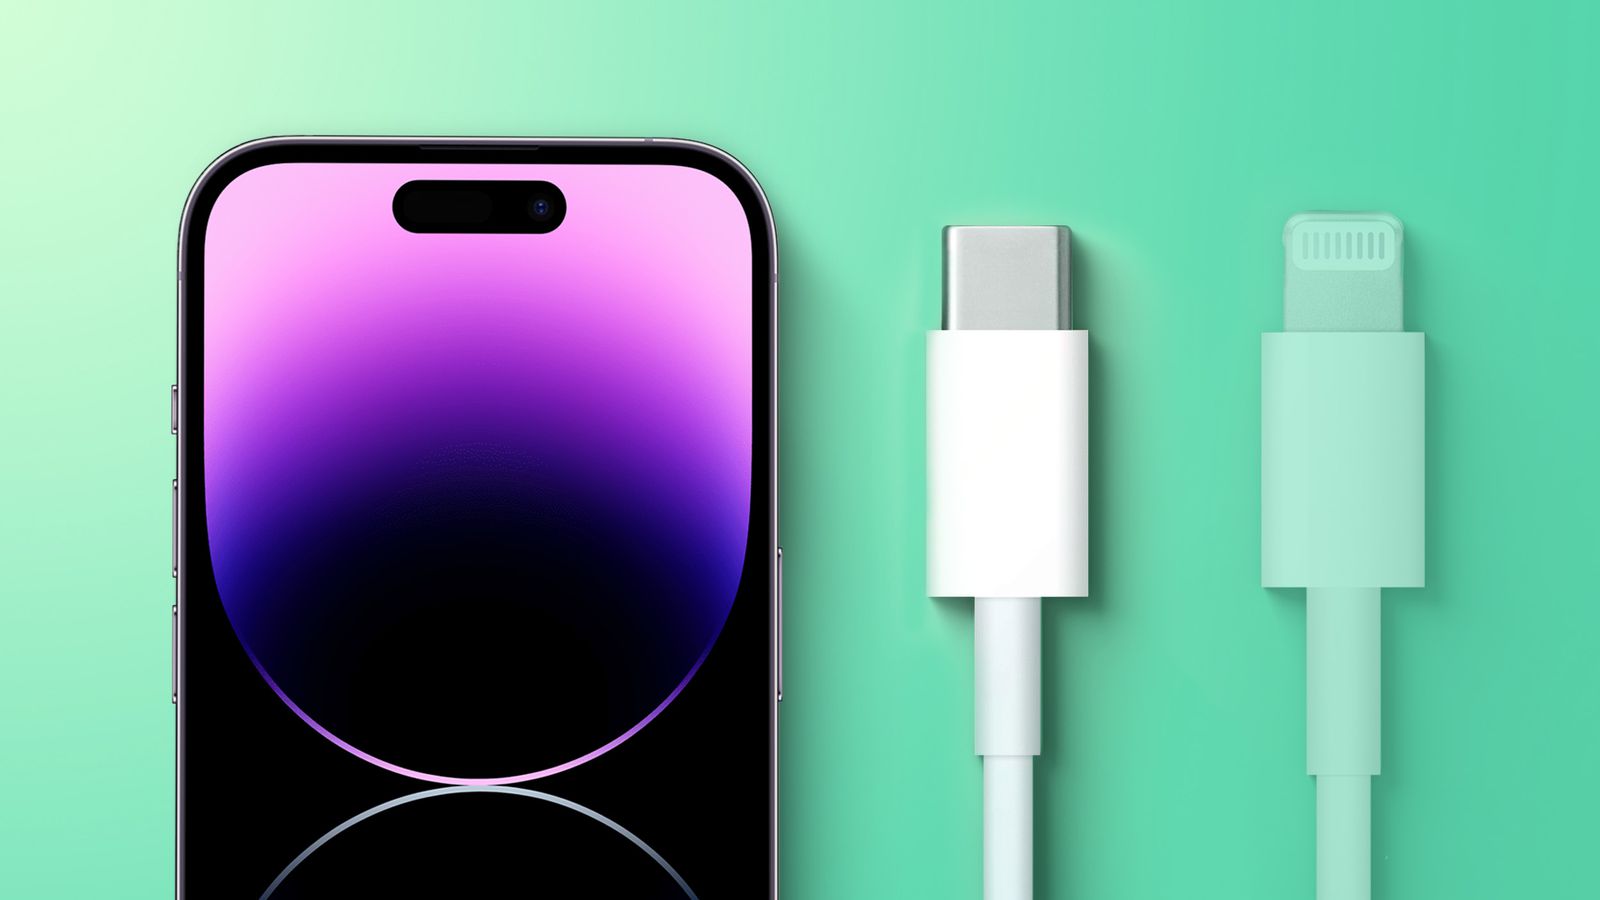 Rumor Recap: What to Expect From the iPhone 15's USB-C Port